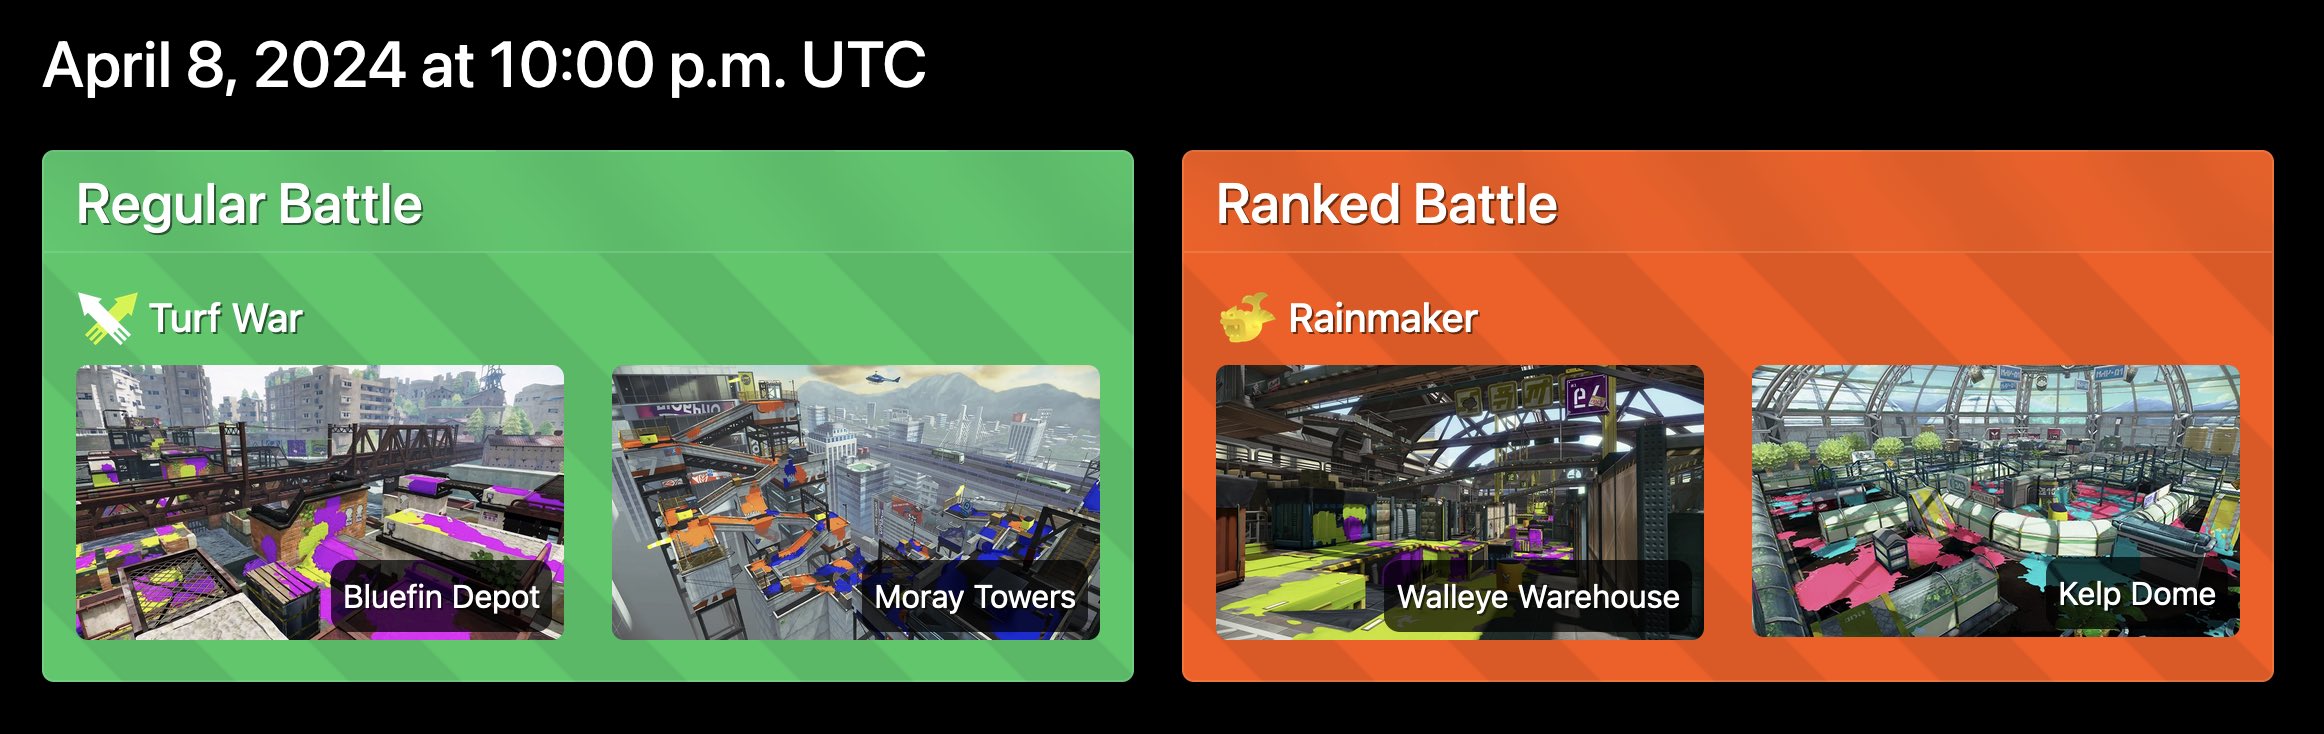 A rotation for Splatoon 1, as shown on the JelonzoBot website. The Regular Battle stages are Bluefin Depot and Moray Towers. The Ranked Battle gamemode is Rainmaker, and the stages are Walleye Warehouse and Kelp Dome.